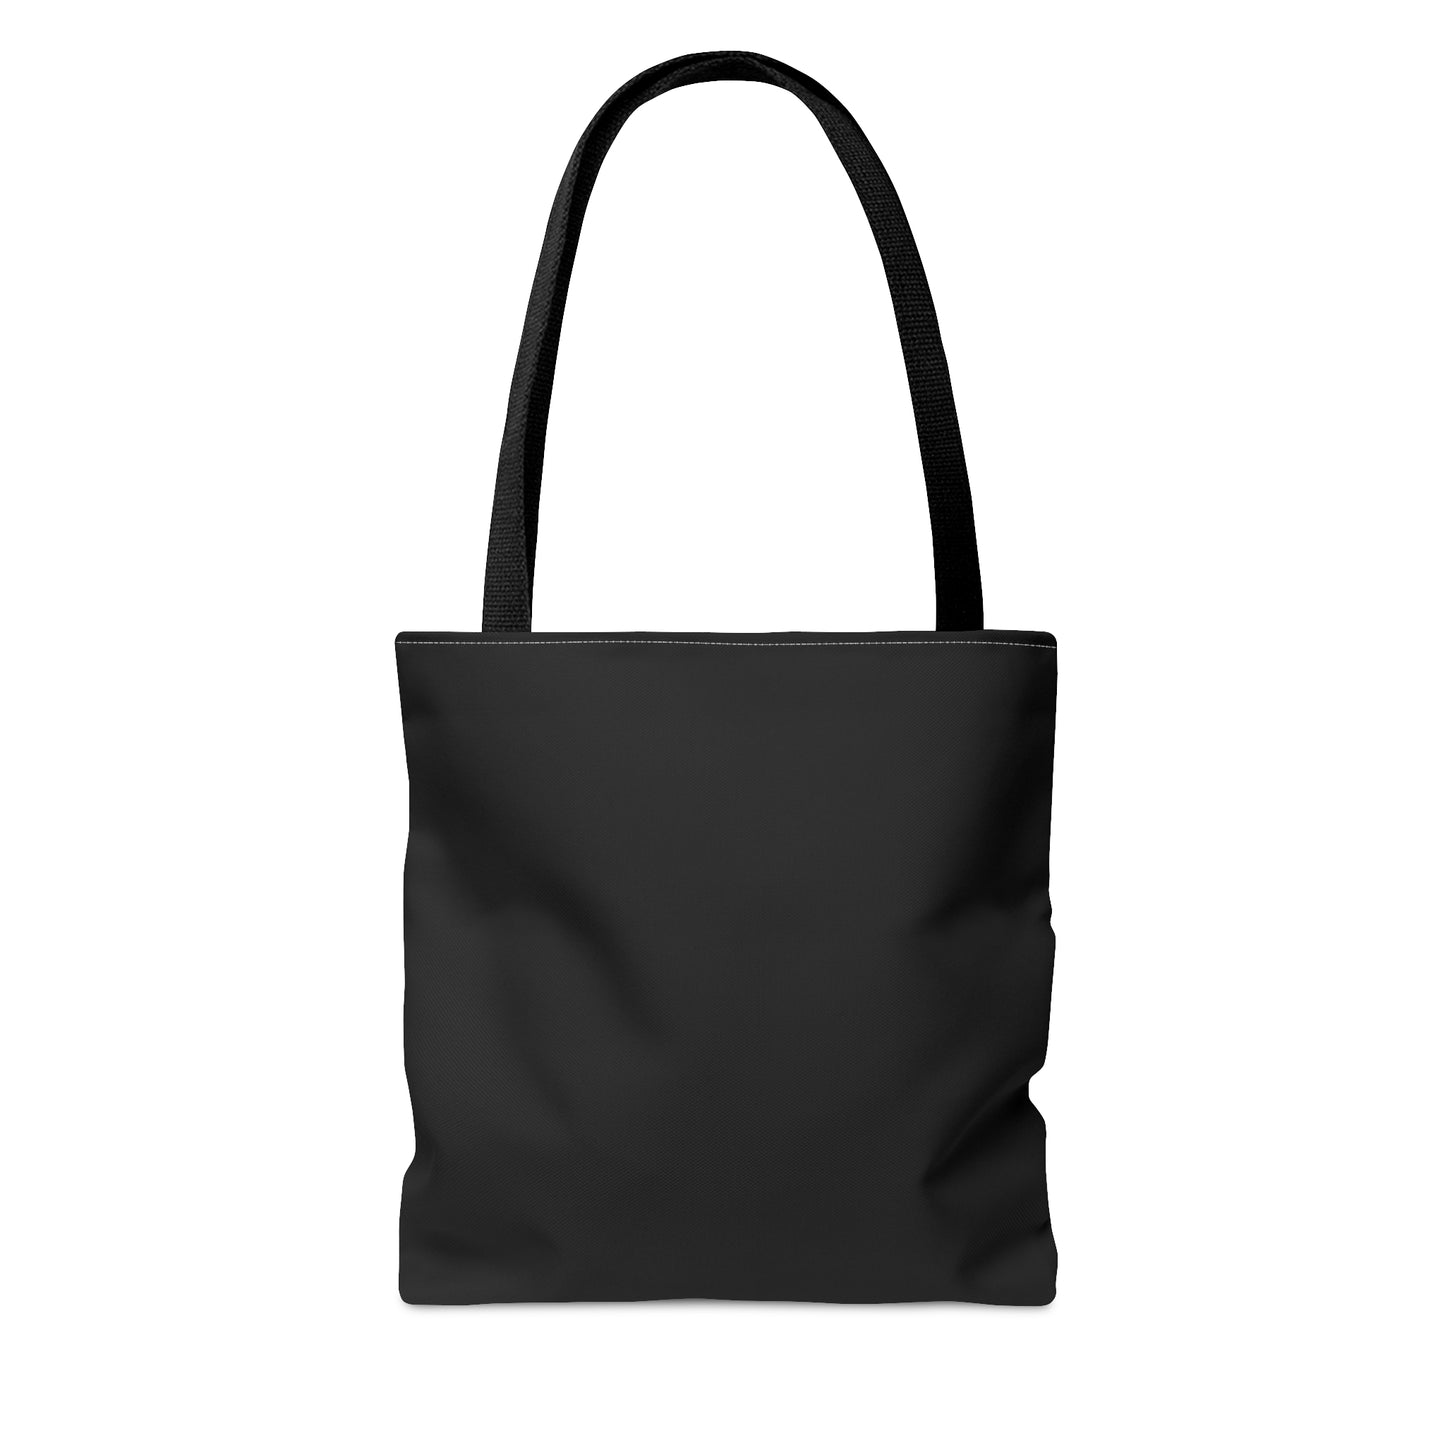 The Lovers Heart Tote Bag